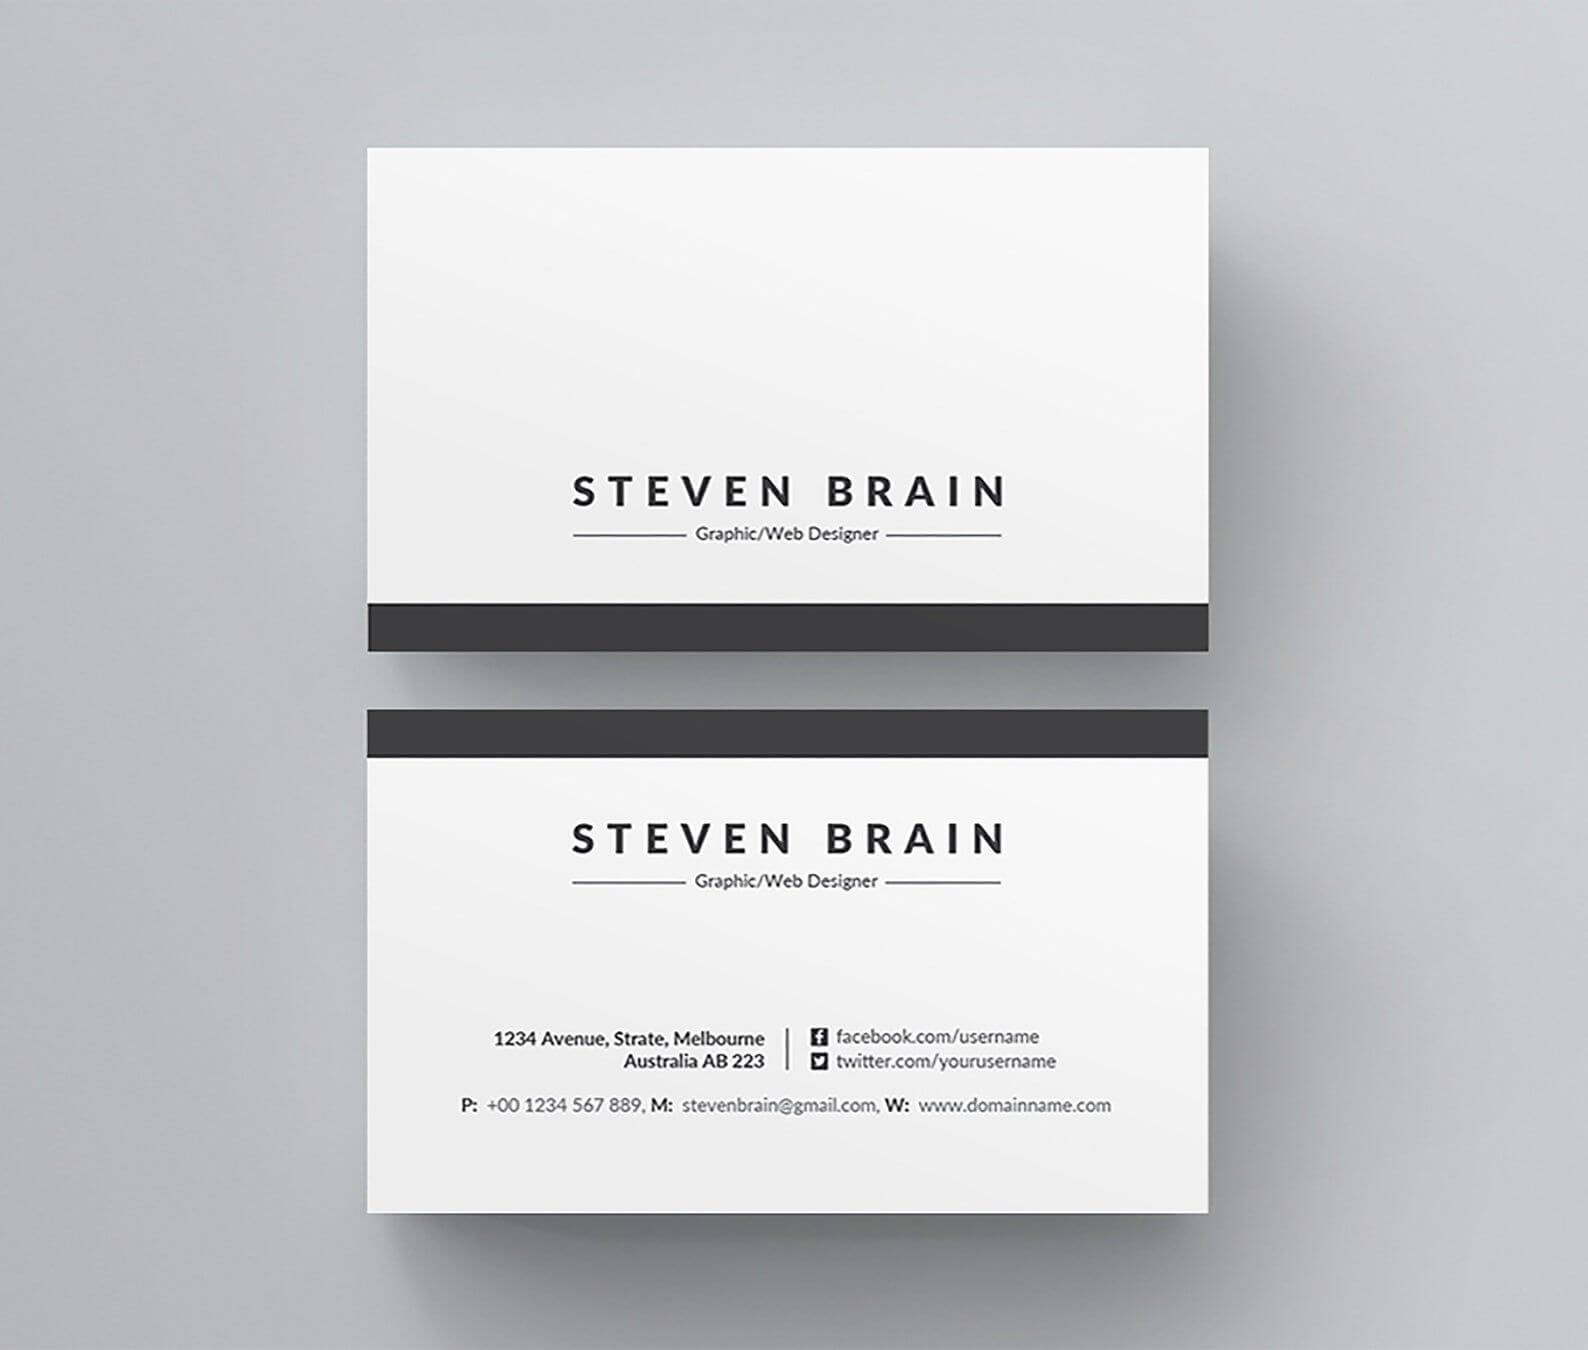 Business Card Template Business Card Design Ms Word Business Regarding Template For Calling Card